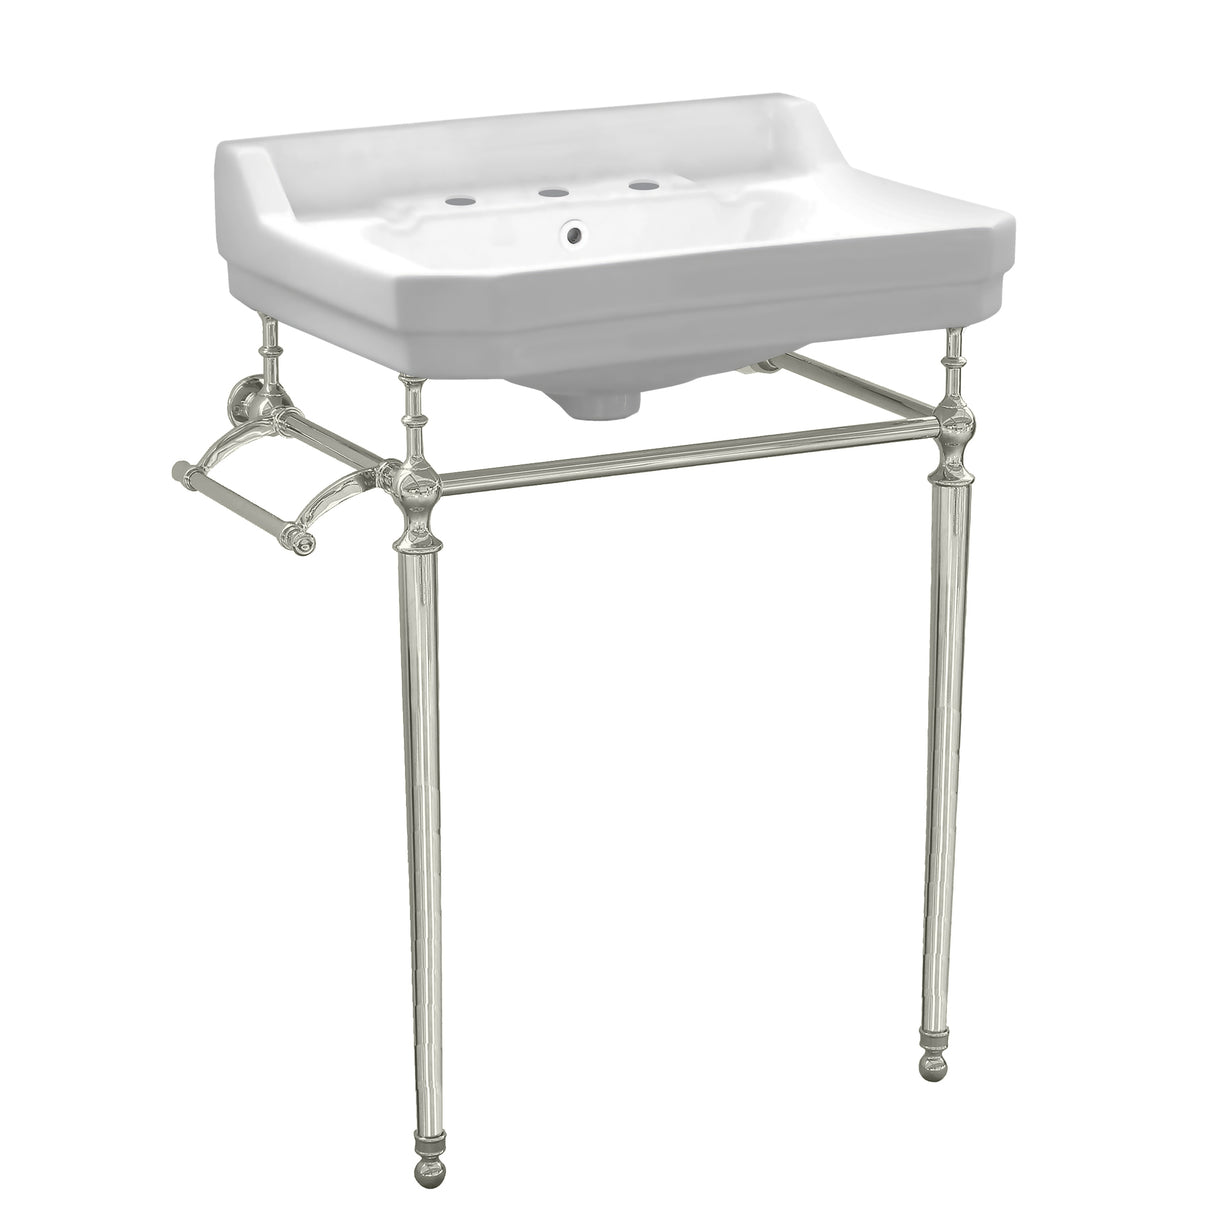 Victoriahaus console with integrated rectangular bowl with widespread hole drill, Polished Nickel leg support, interchangable towel bar, backsplash and overflow